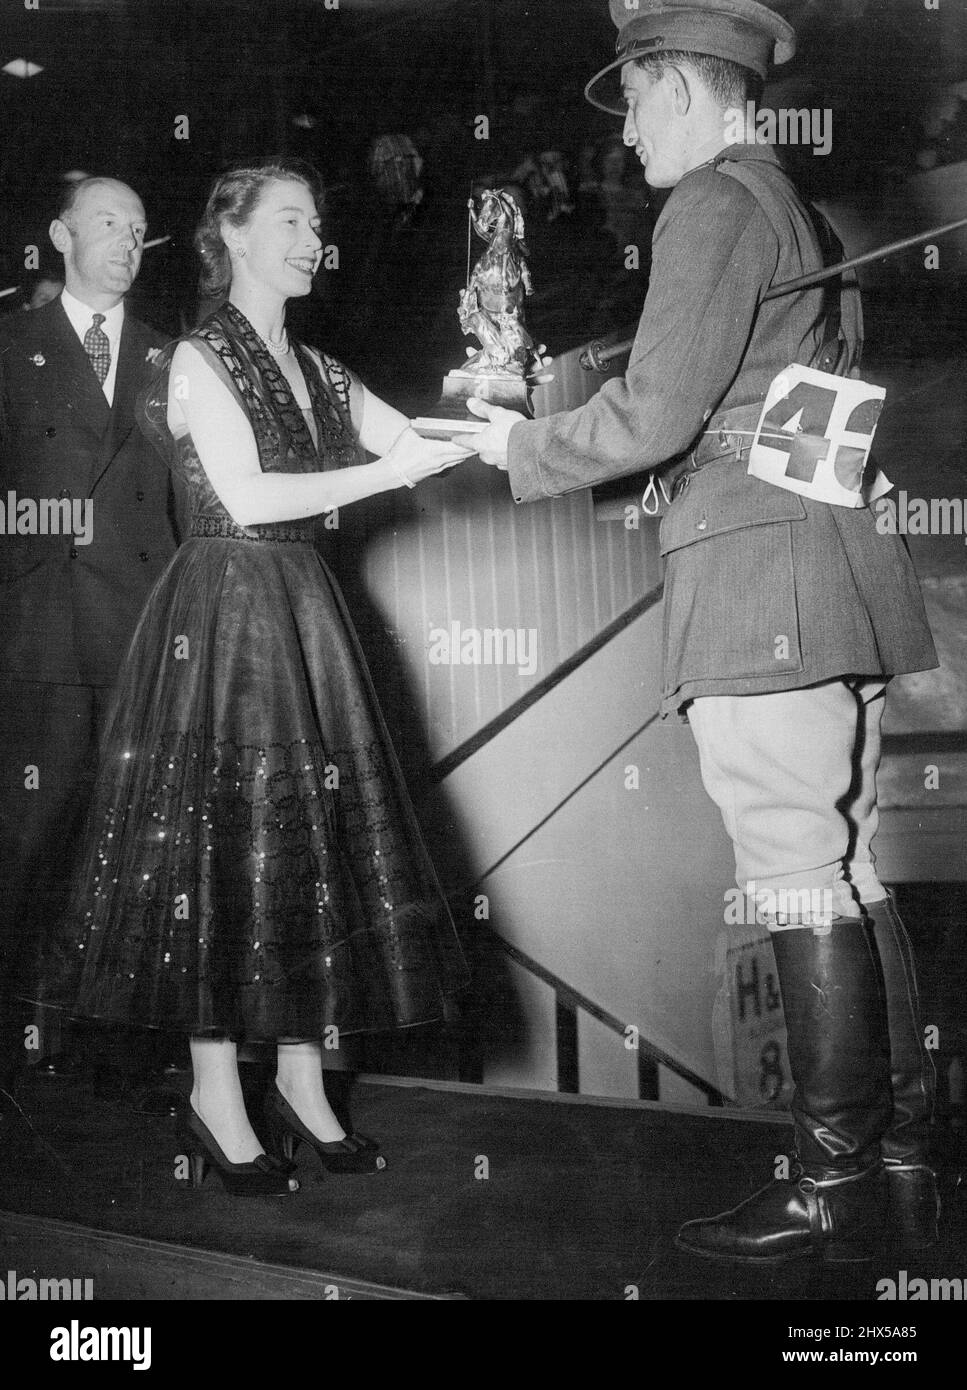 So The Cup Changes Hands - Princess Elizabeth, in a dark spiral-embroided evening dress presents the George V Gold Challenge Cup to Capt. K. Barry of the Eire Army, at the International Horse Show, at the White city, London last night. Captain Barry on his chestnut mare Ballyneety, had the only clear round in the finals. Lt. Col. Harry Llewellyn, Winner in 1948 and last year, came to grief on a white wicket gate which proved the 'graveyard' of many hopes during the evening. Lt. Col. Harry Llewellyn was riding Foxhunter. July 26, 1951. (Photo by Paul Popper). Stock Photo